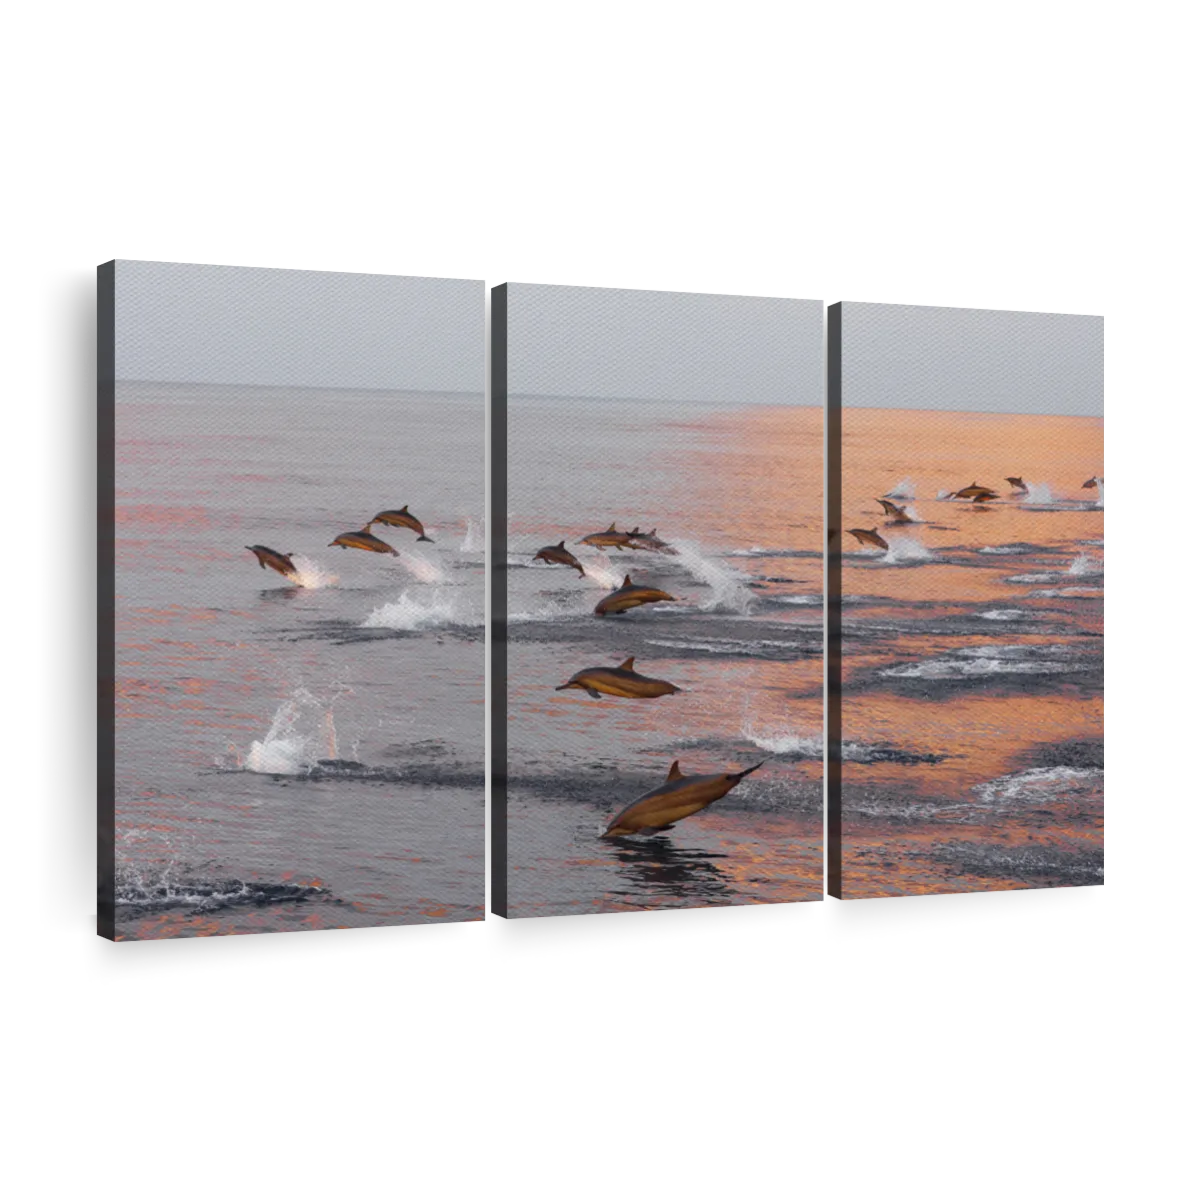 Dolphins Hunting Fish Art: Canvas Prints, Frames & Posters